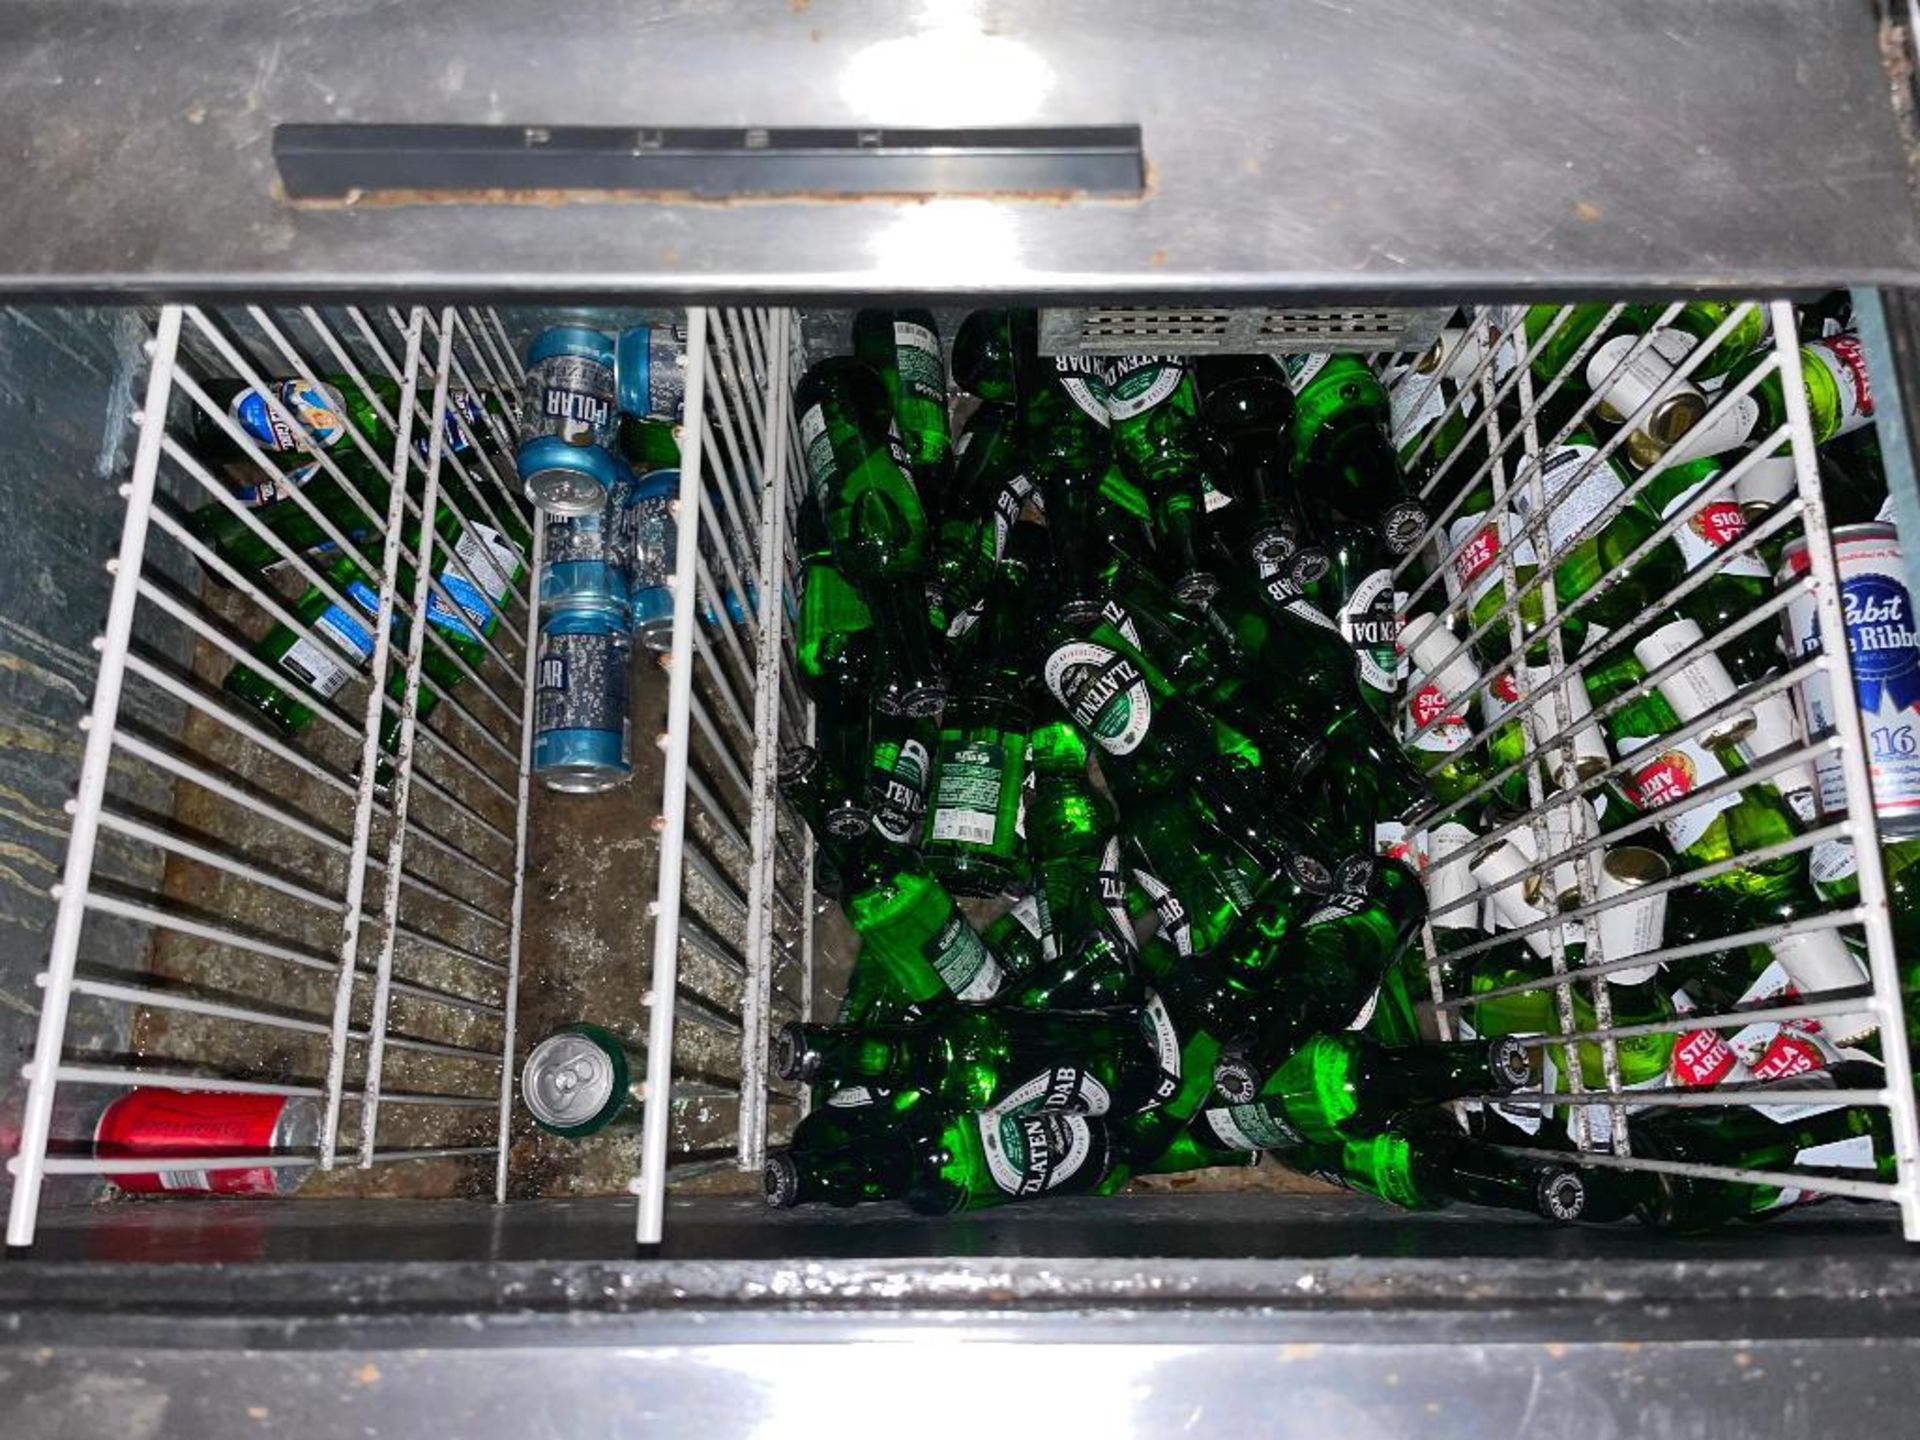 DESCRIPTION: CONTENTS OF LOT #16 - APPROX 100+ BOTTLES OF COLD BEER. ADDITIONAL INFORMATION FIRST DA - Image 2 of 4